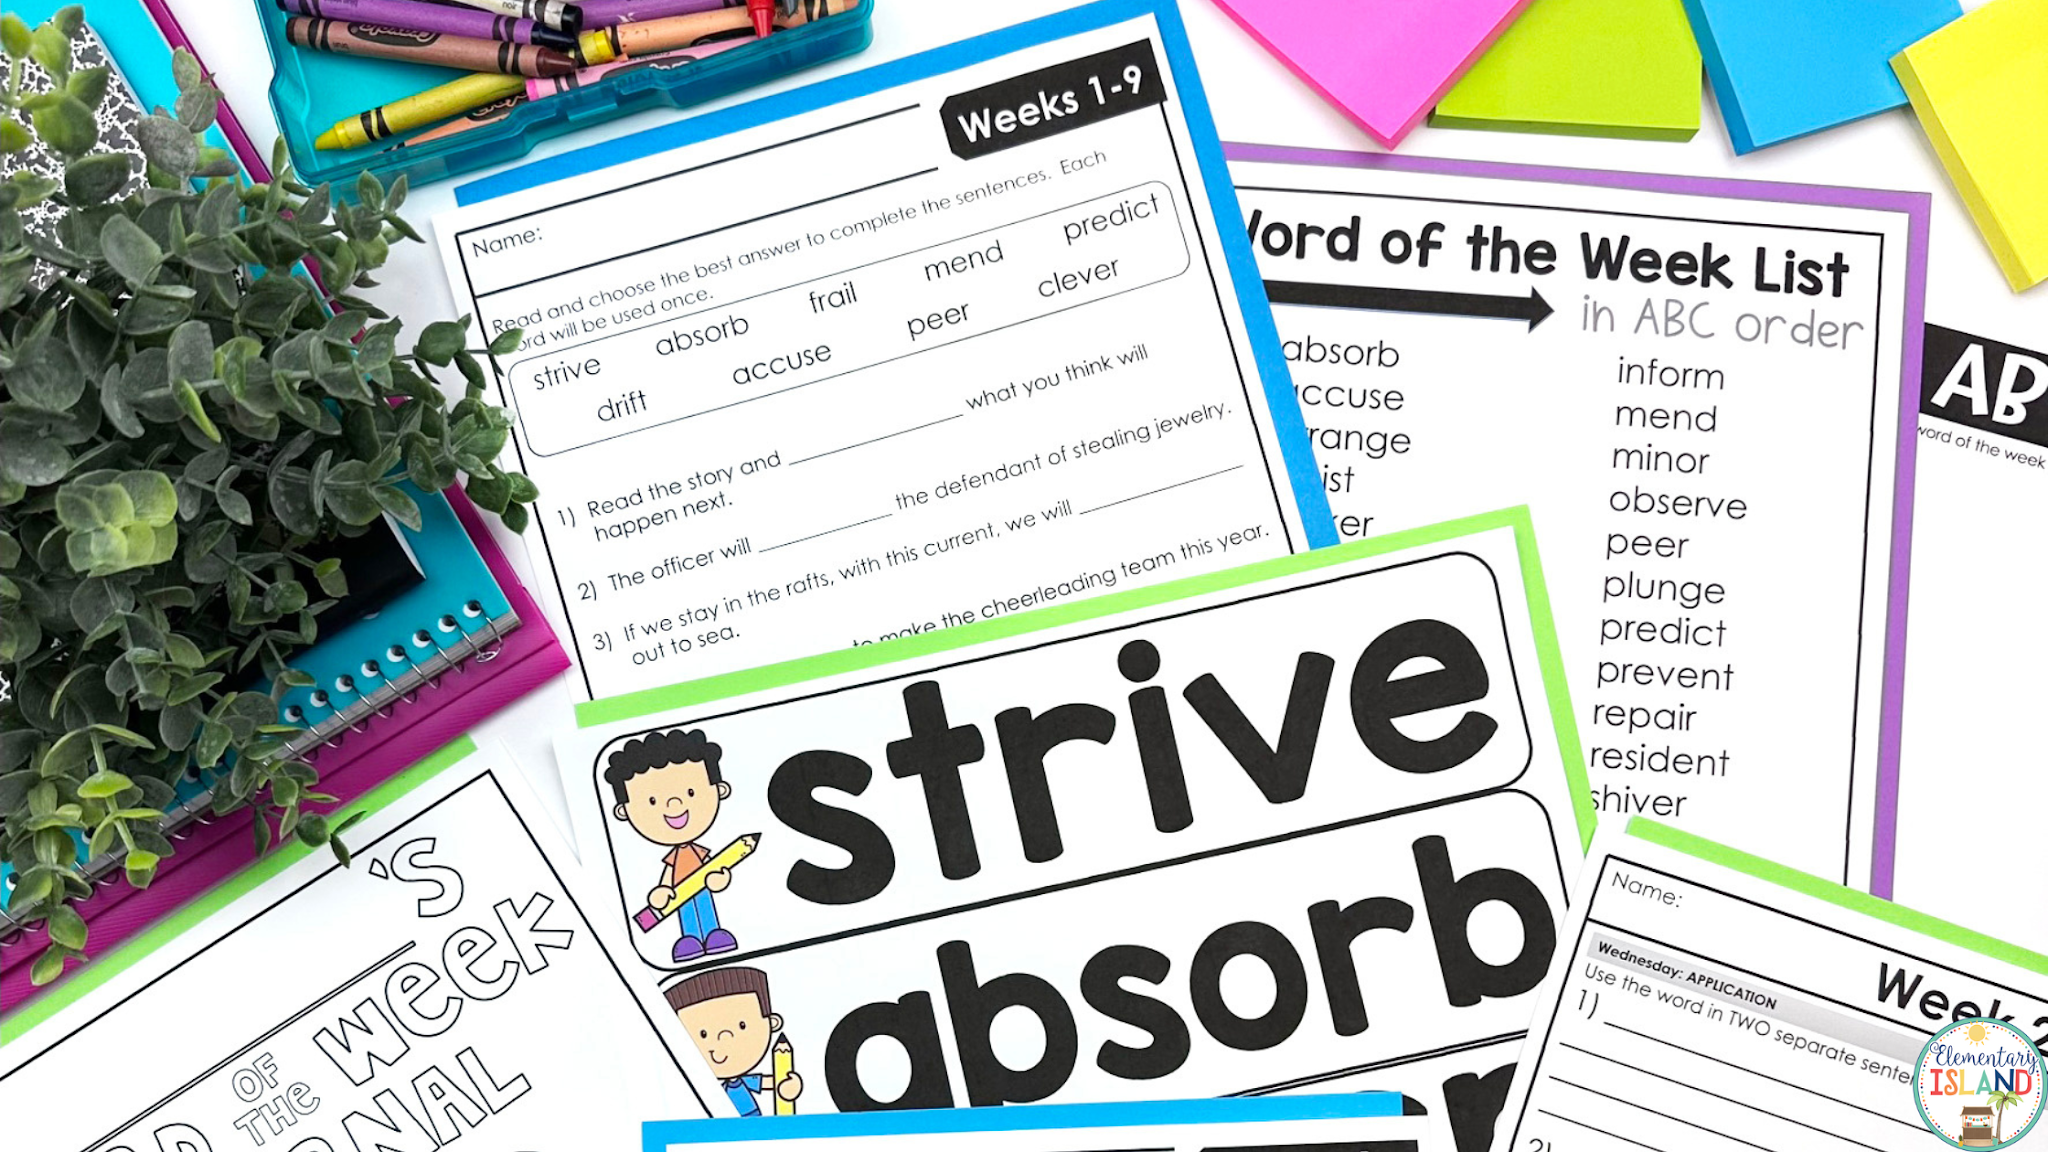 Some benefits of using this word of the week resource include:  expanding vocabulary, enhanced comprehension, and context analysis skills just to name a few.